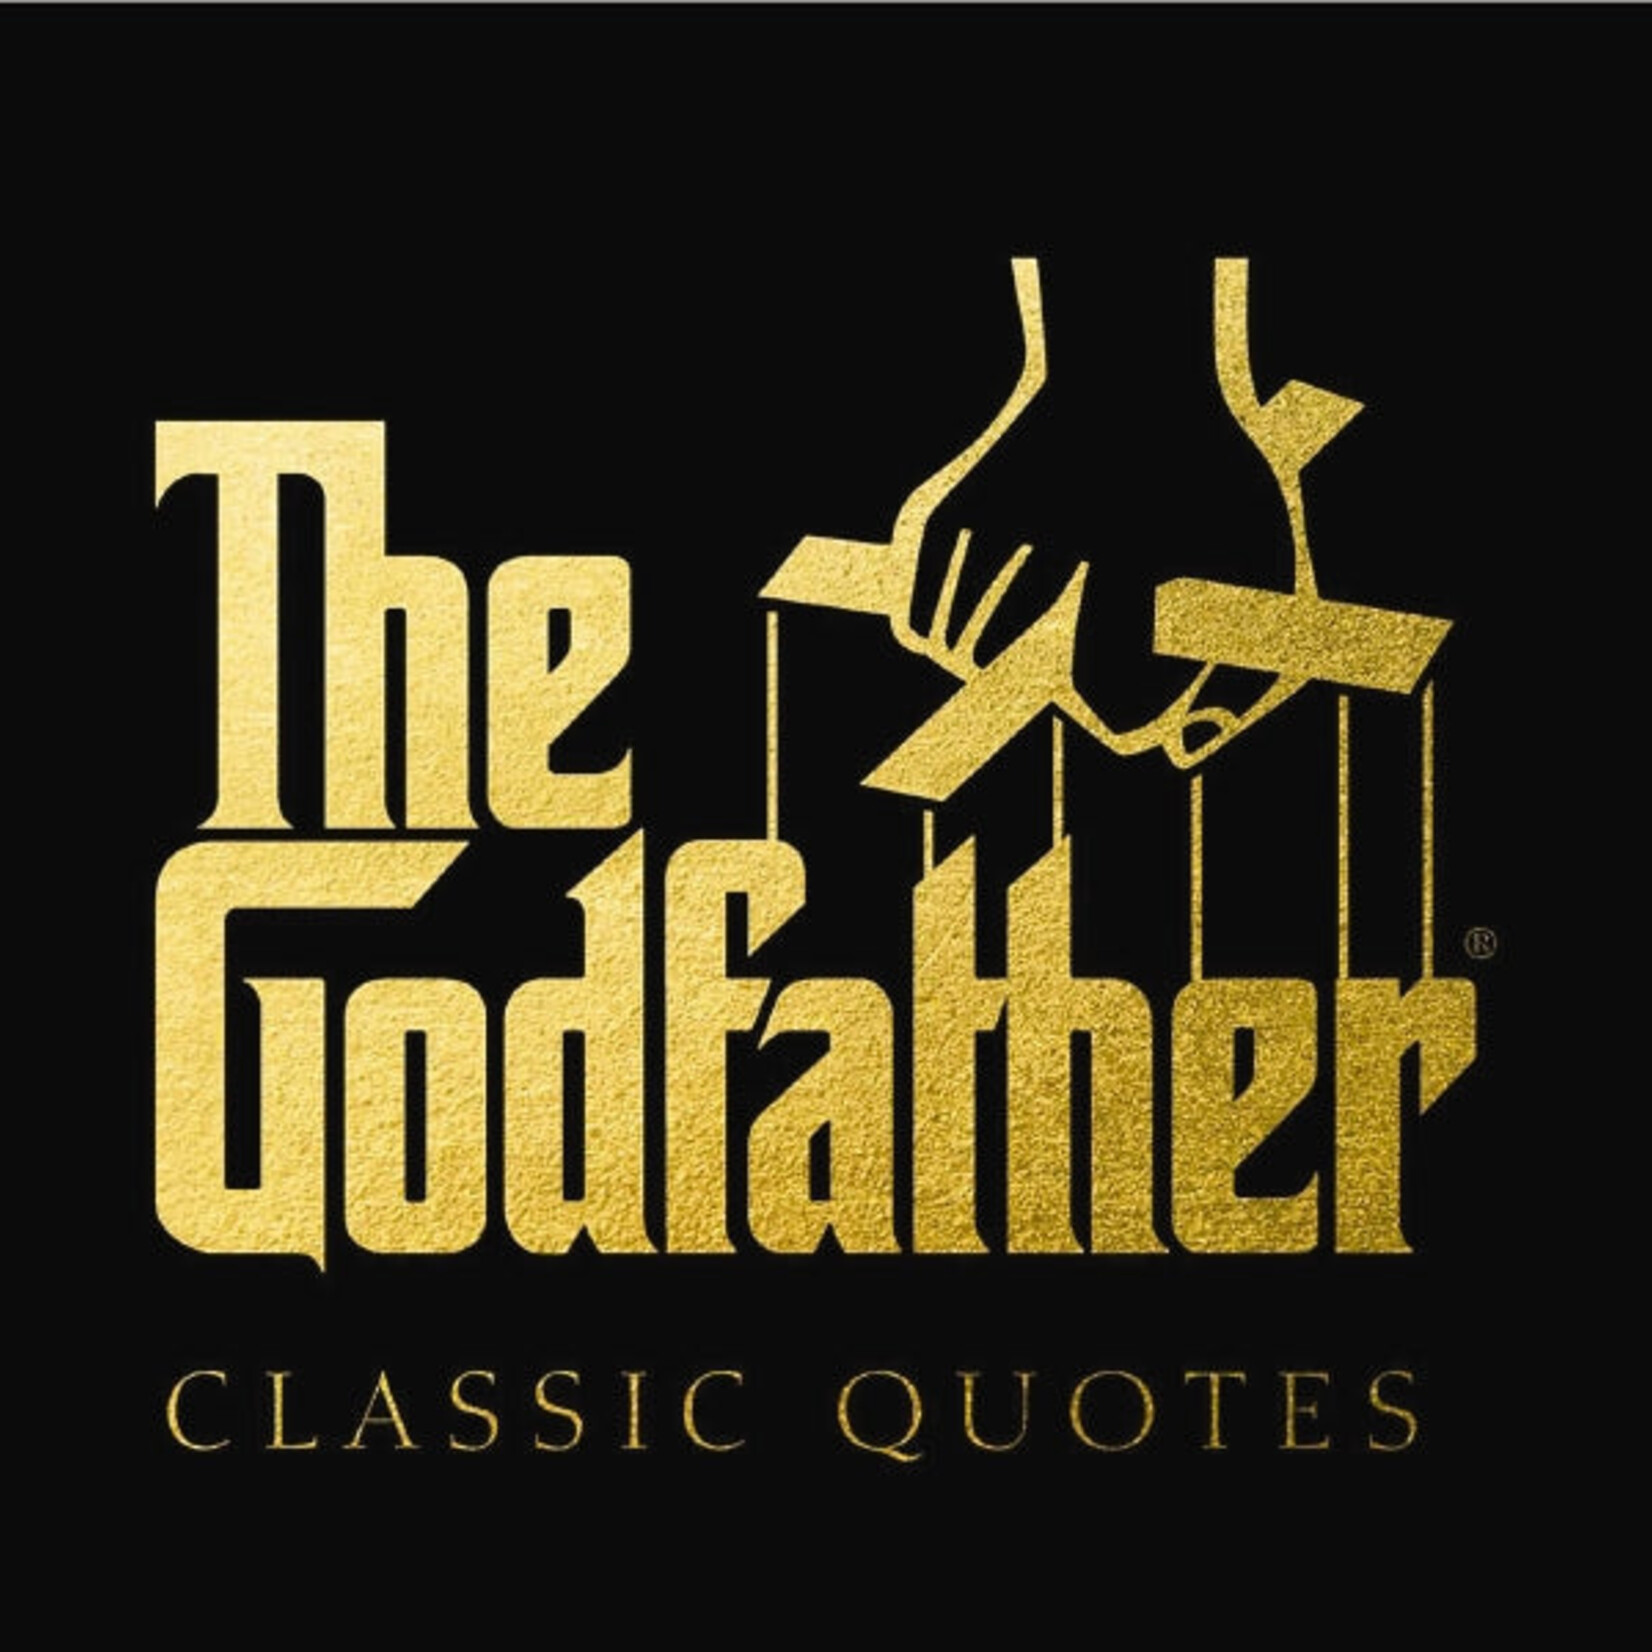 Cider Mill Press - Book - Godfather Classic Quotes